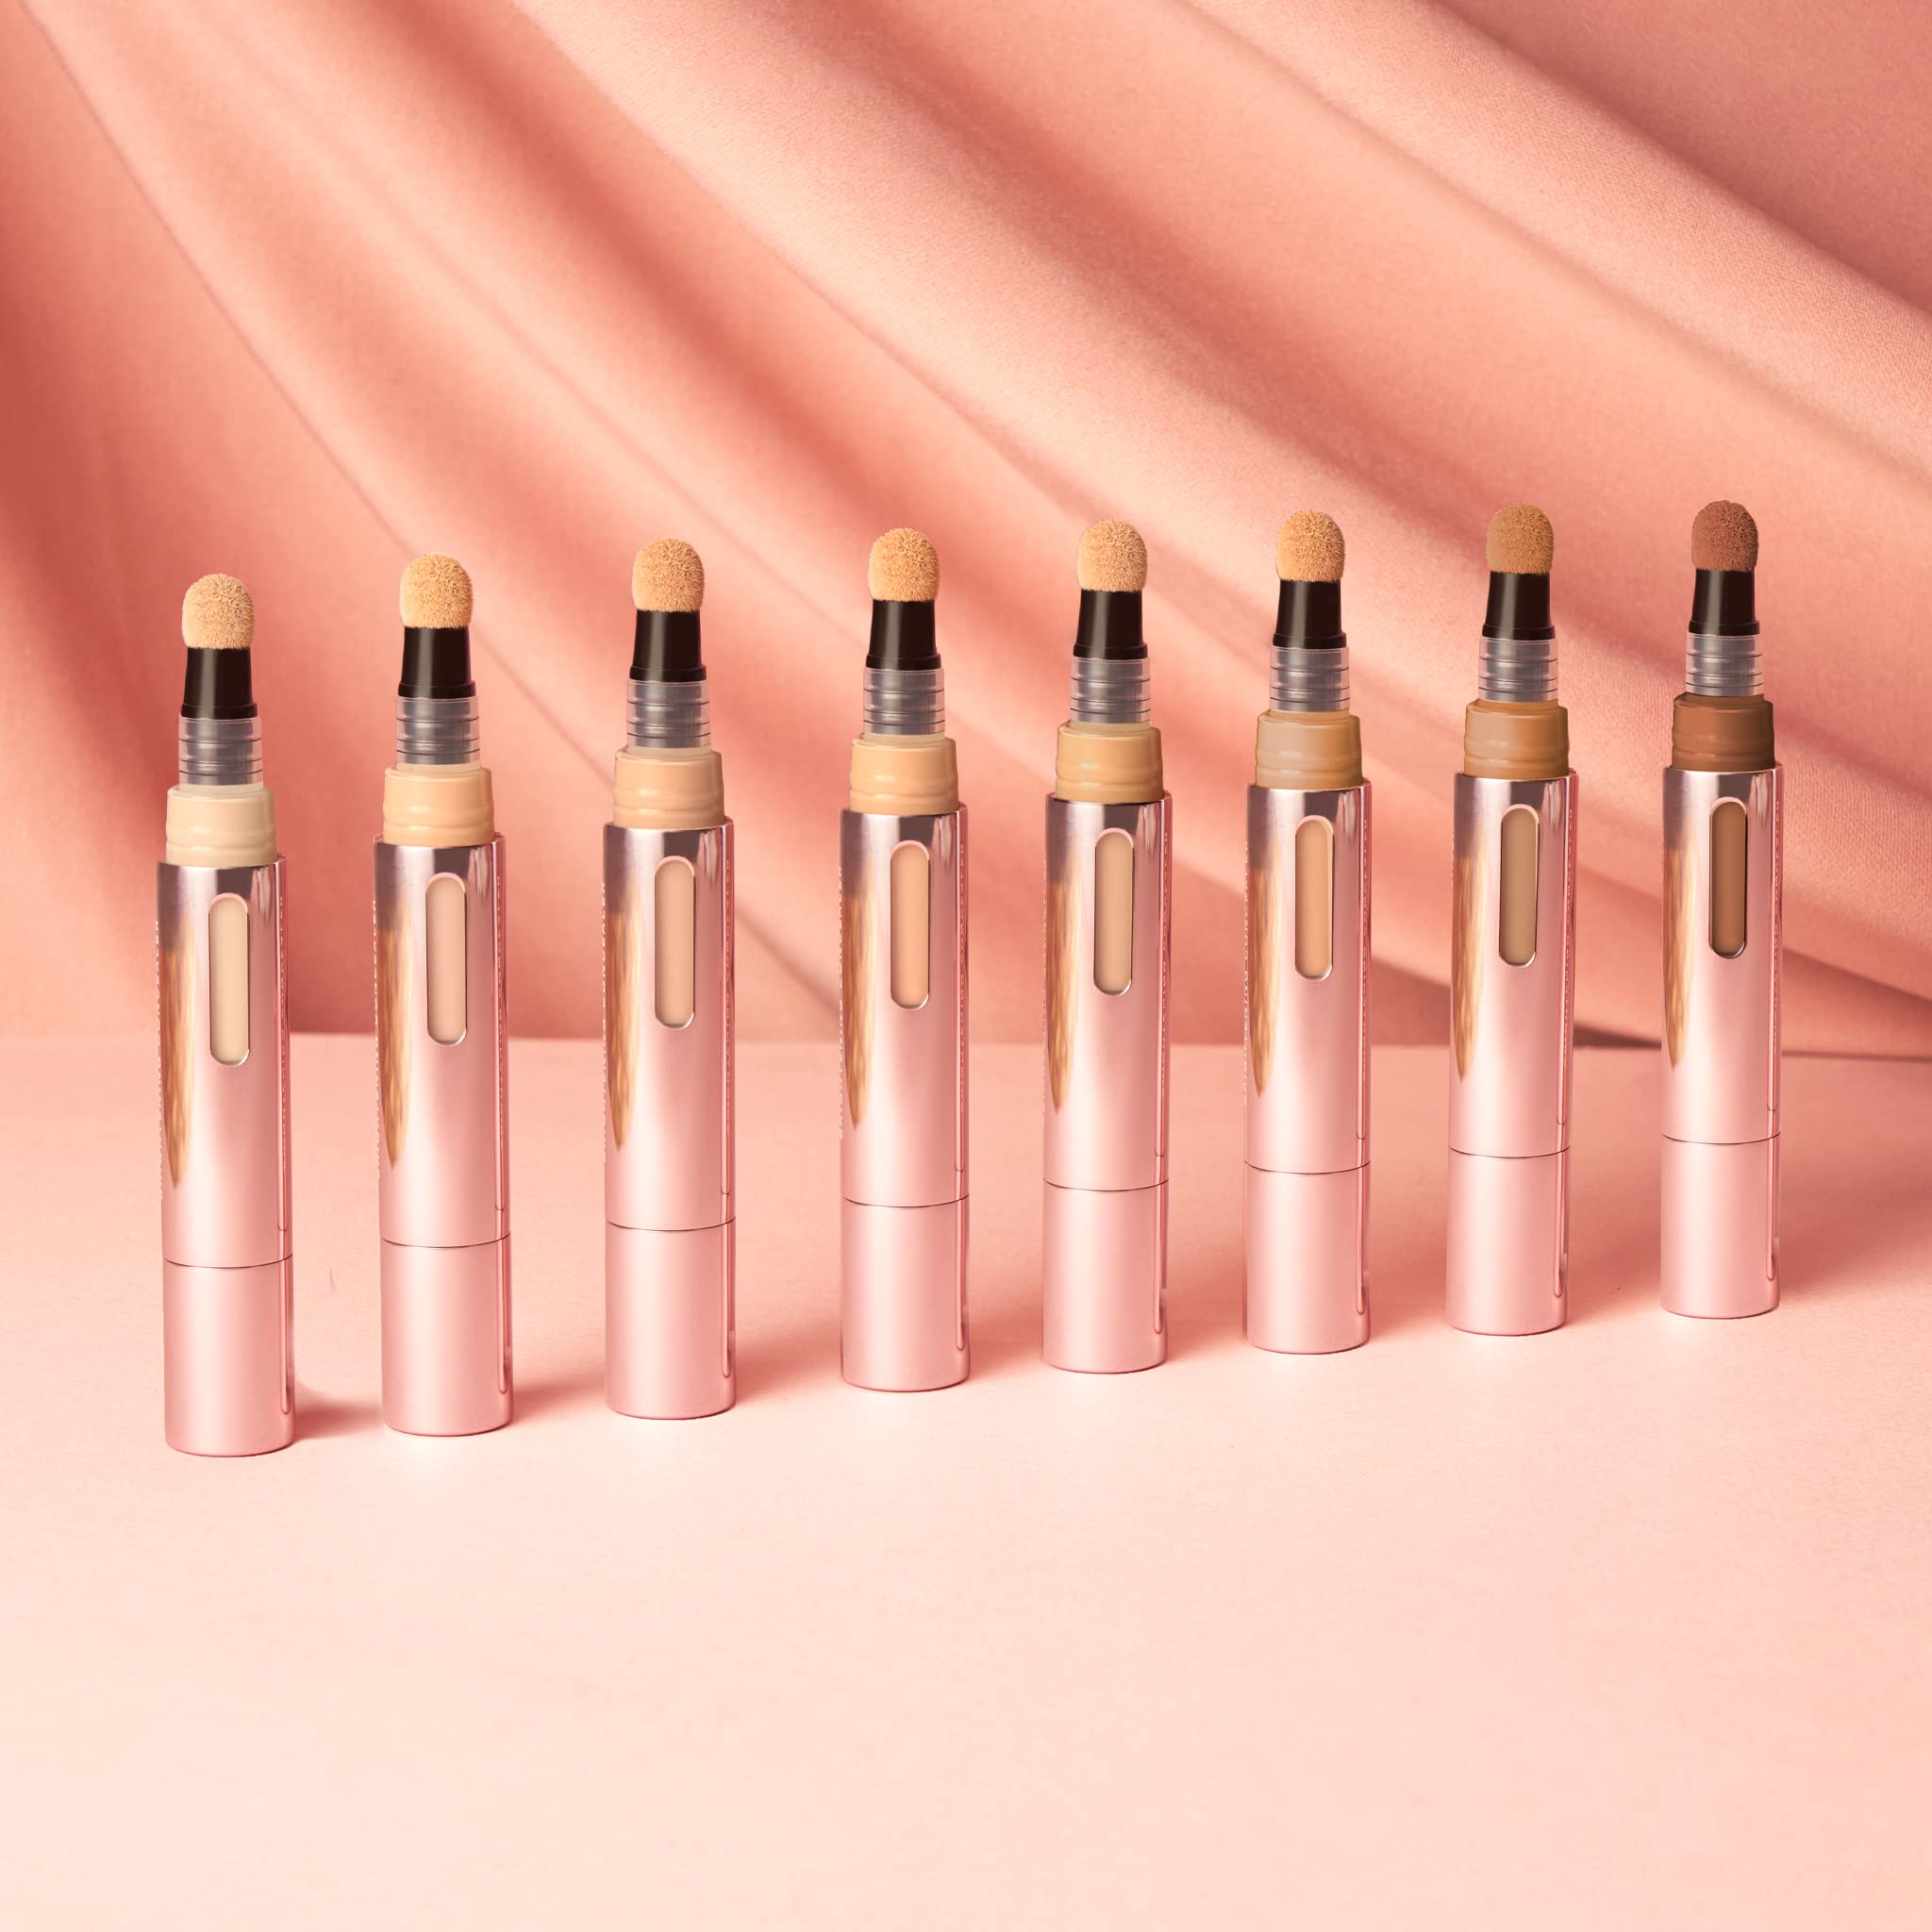 Mally Beauty - The Plush Pen Brightening Concealer Stick - Light - Hydrating Turmeric, Vitamin E, and Hyaluronic Acid Infused Formula - Medium Buildable Coverage with a Natural, Smooth Finish